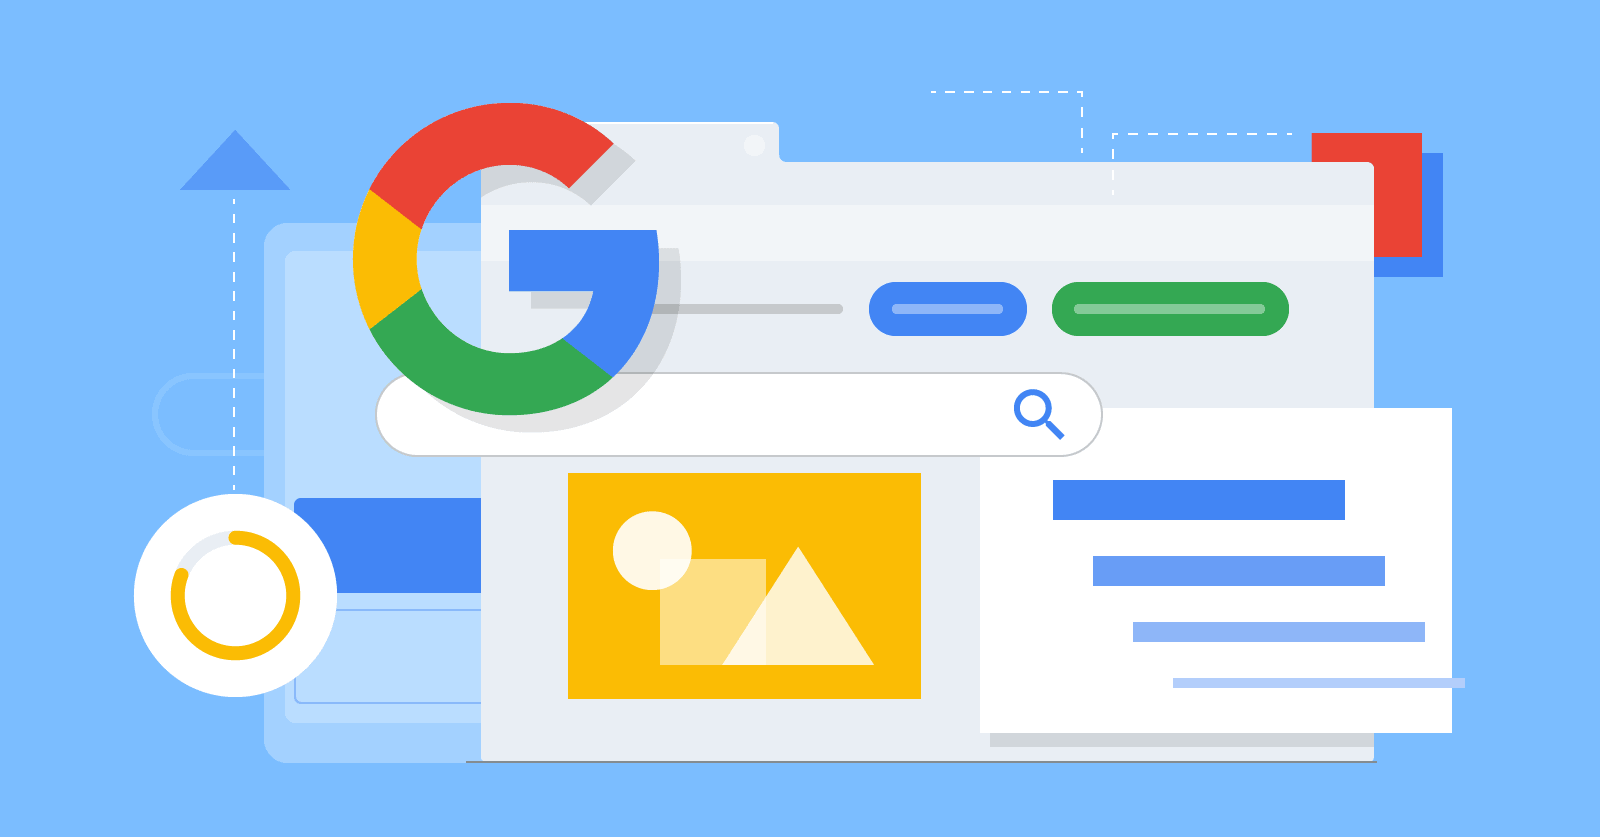 How Does Google Rank Search Results? | Rockstar Marketing